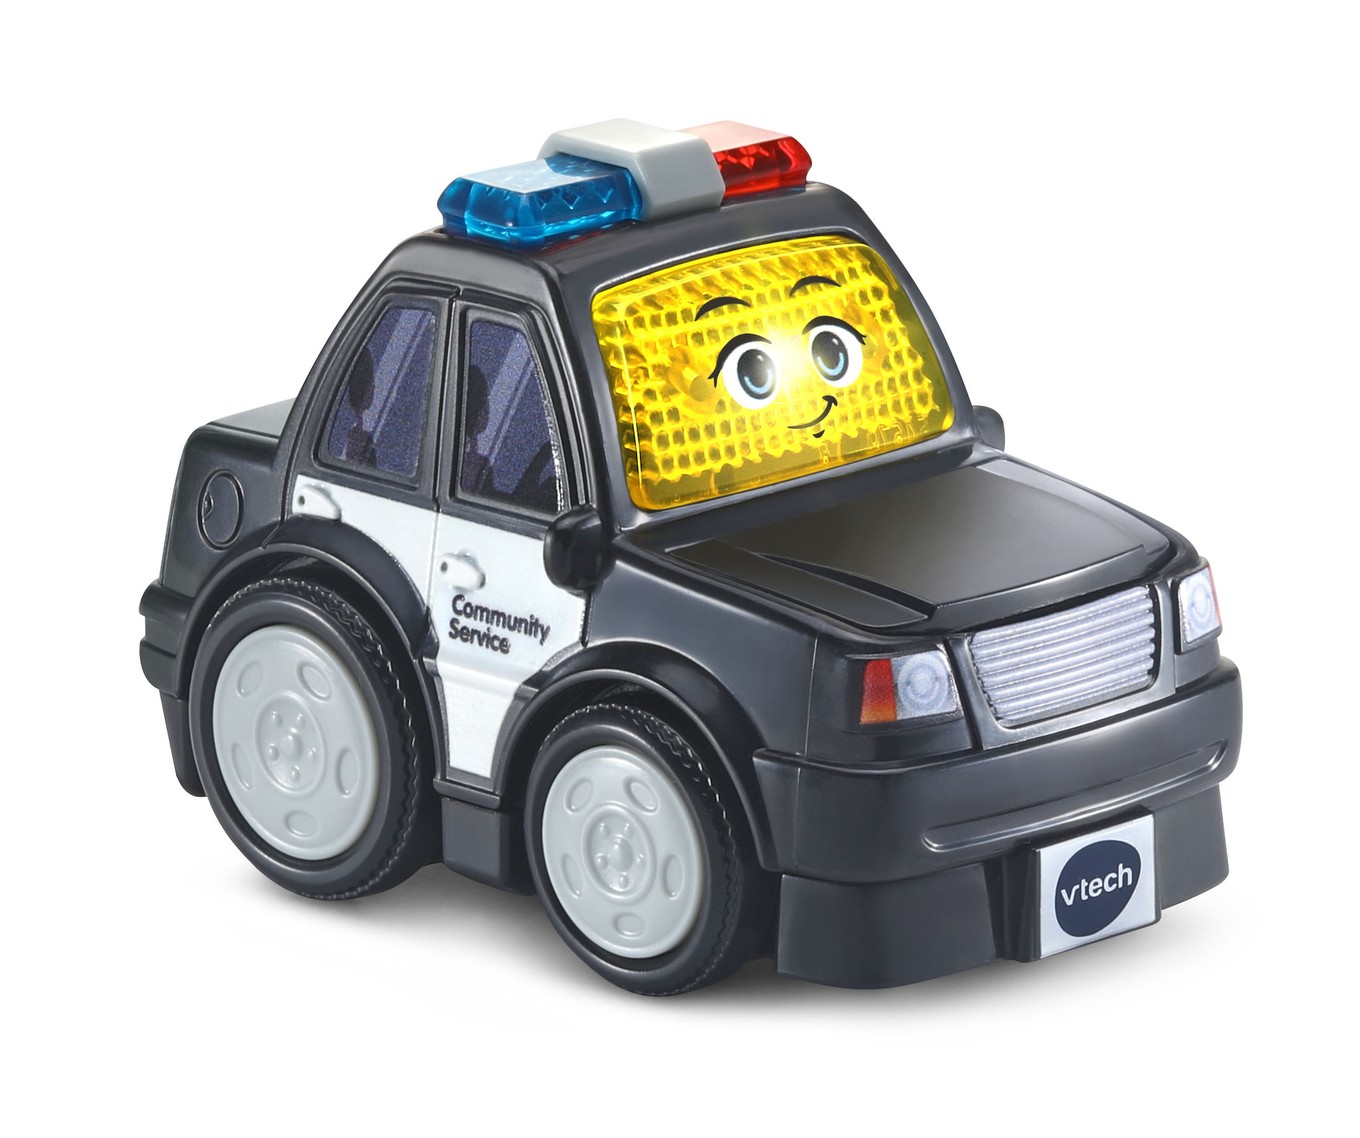 VTech® Switch & Go® 3-in-1 Rescue Rex With Police Car, Fire Truck